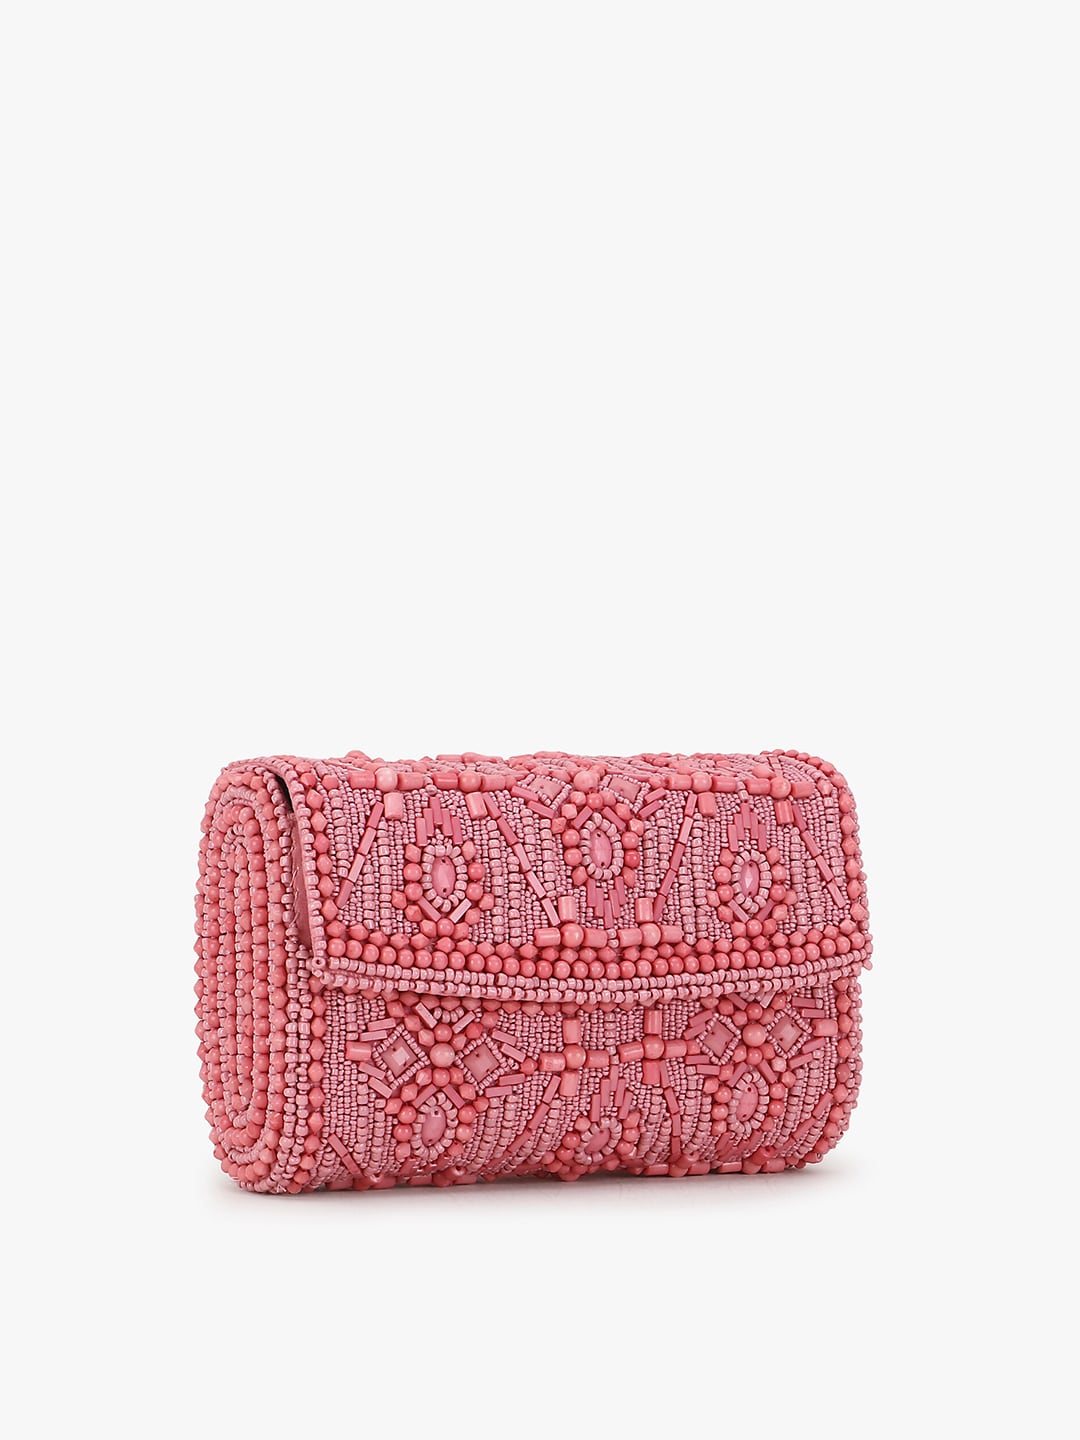 Anekaant Pink Embellished Foldover Clutch - Distacart